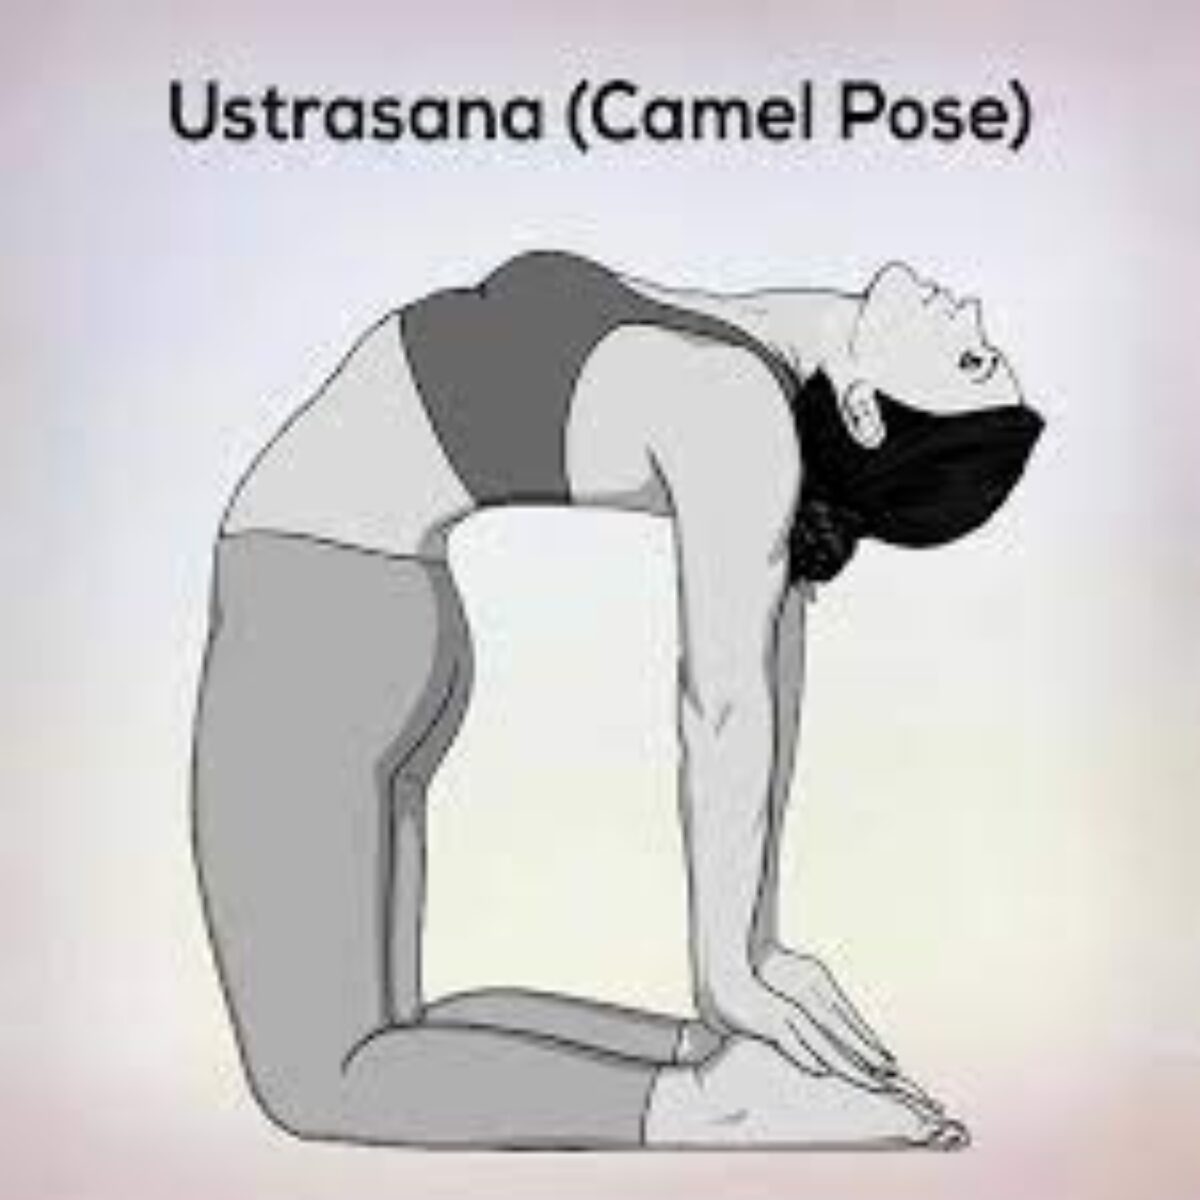 Illustrated Kundalini Yoga Camel Pose for Optimal Health and Wellbeing